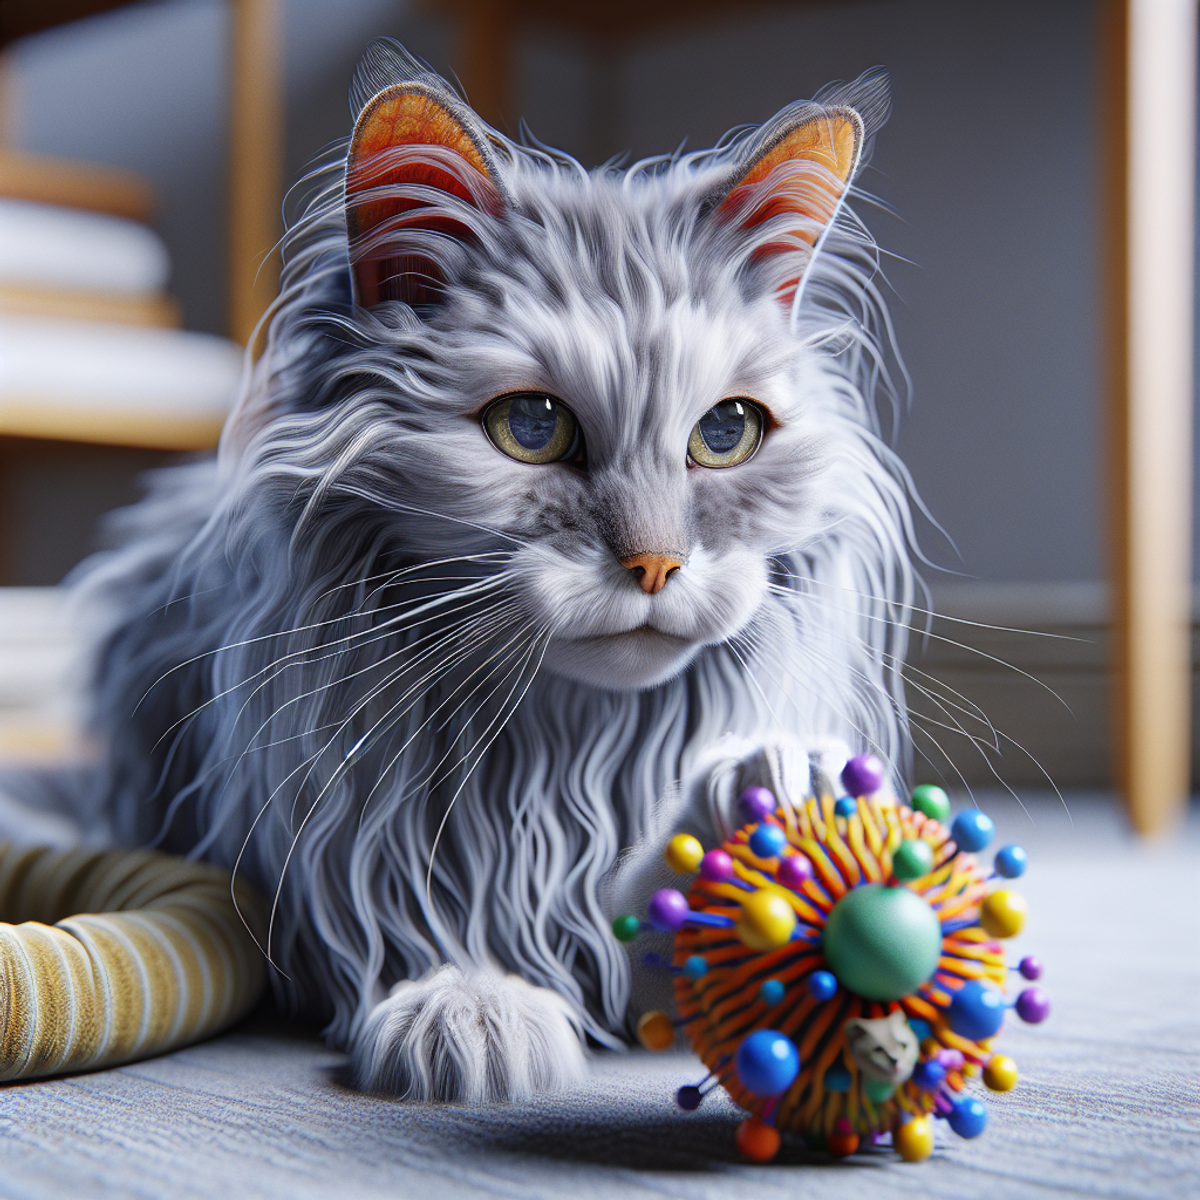 Elderly cat playing with a stimulating toy in a cozy home environment.